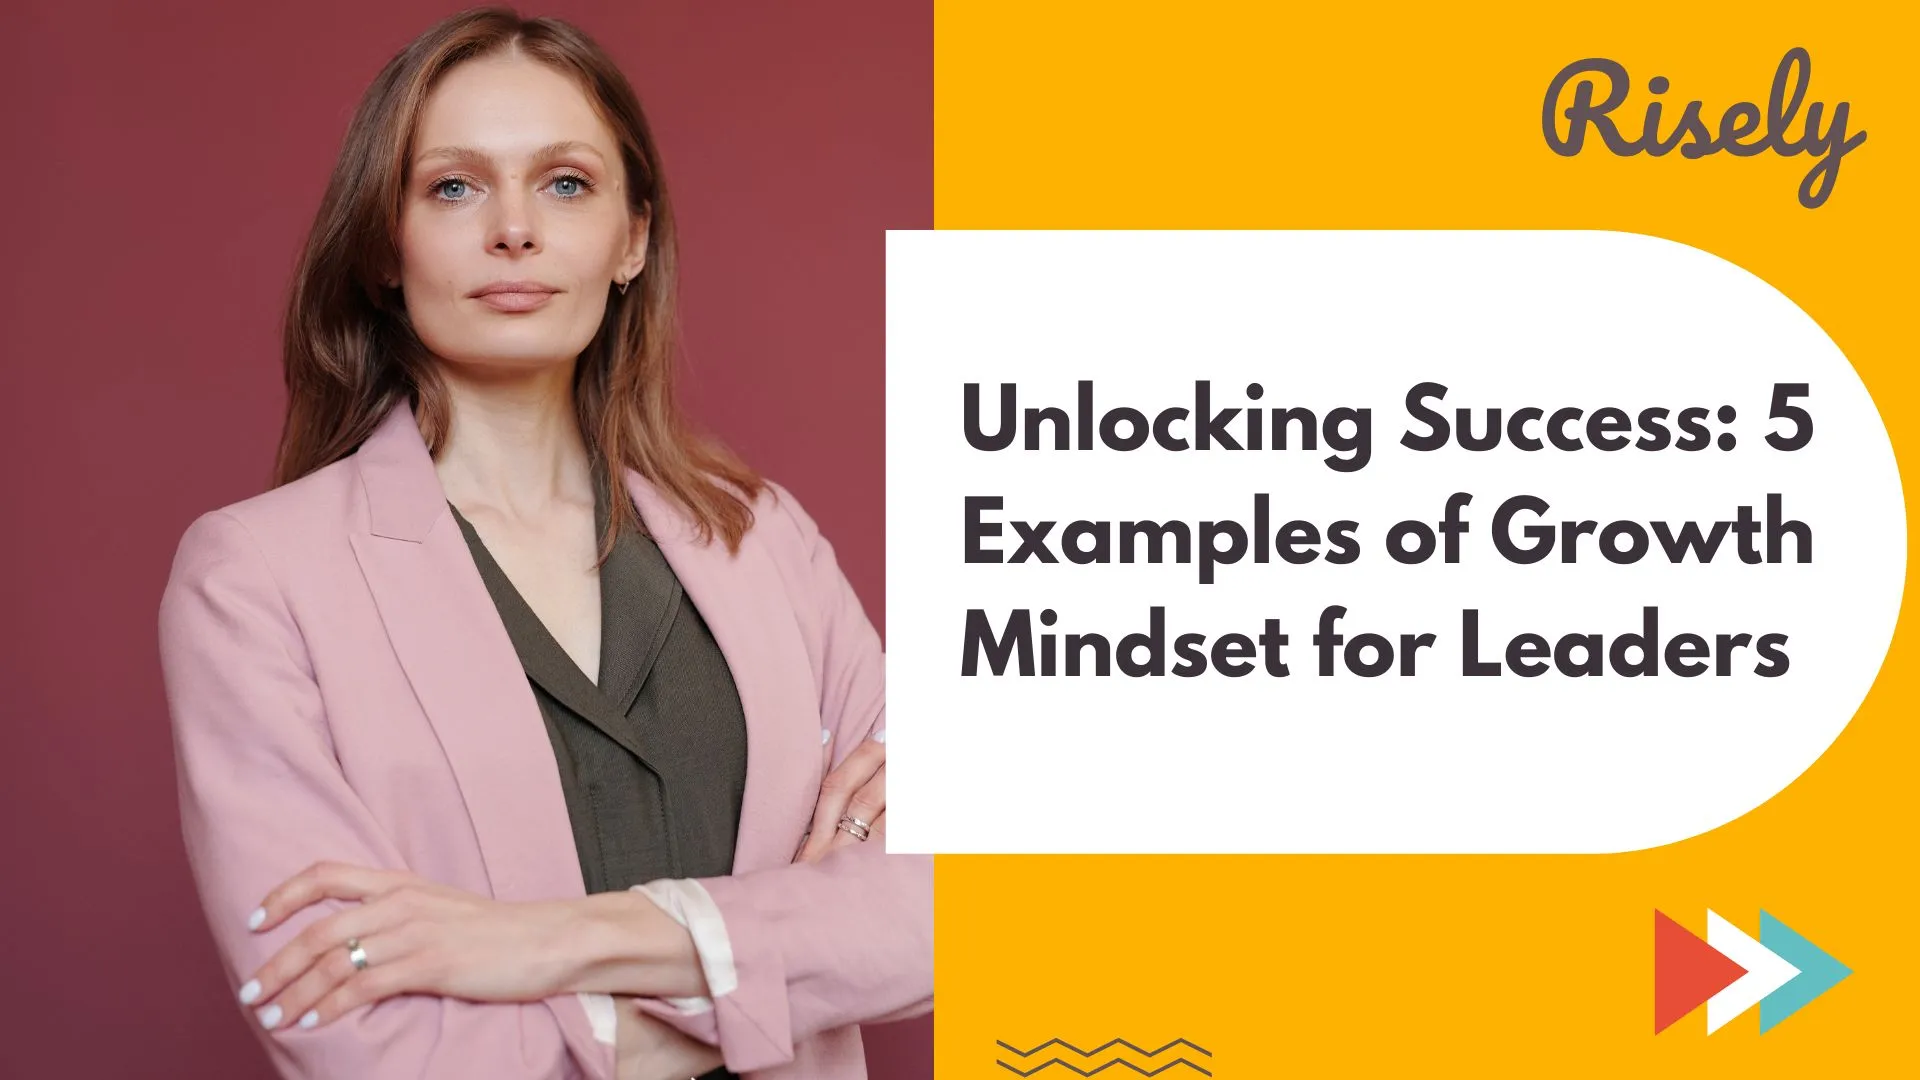 Unlocking Success: 5 Examples of Growth Mindset for Leaders